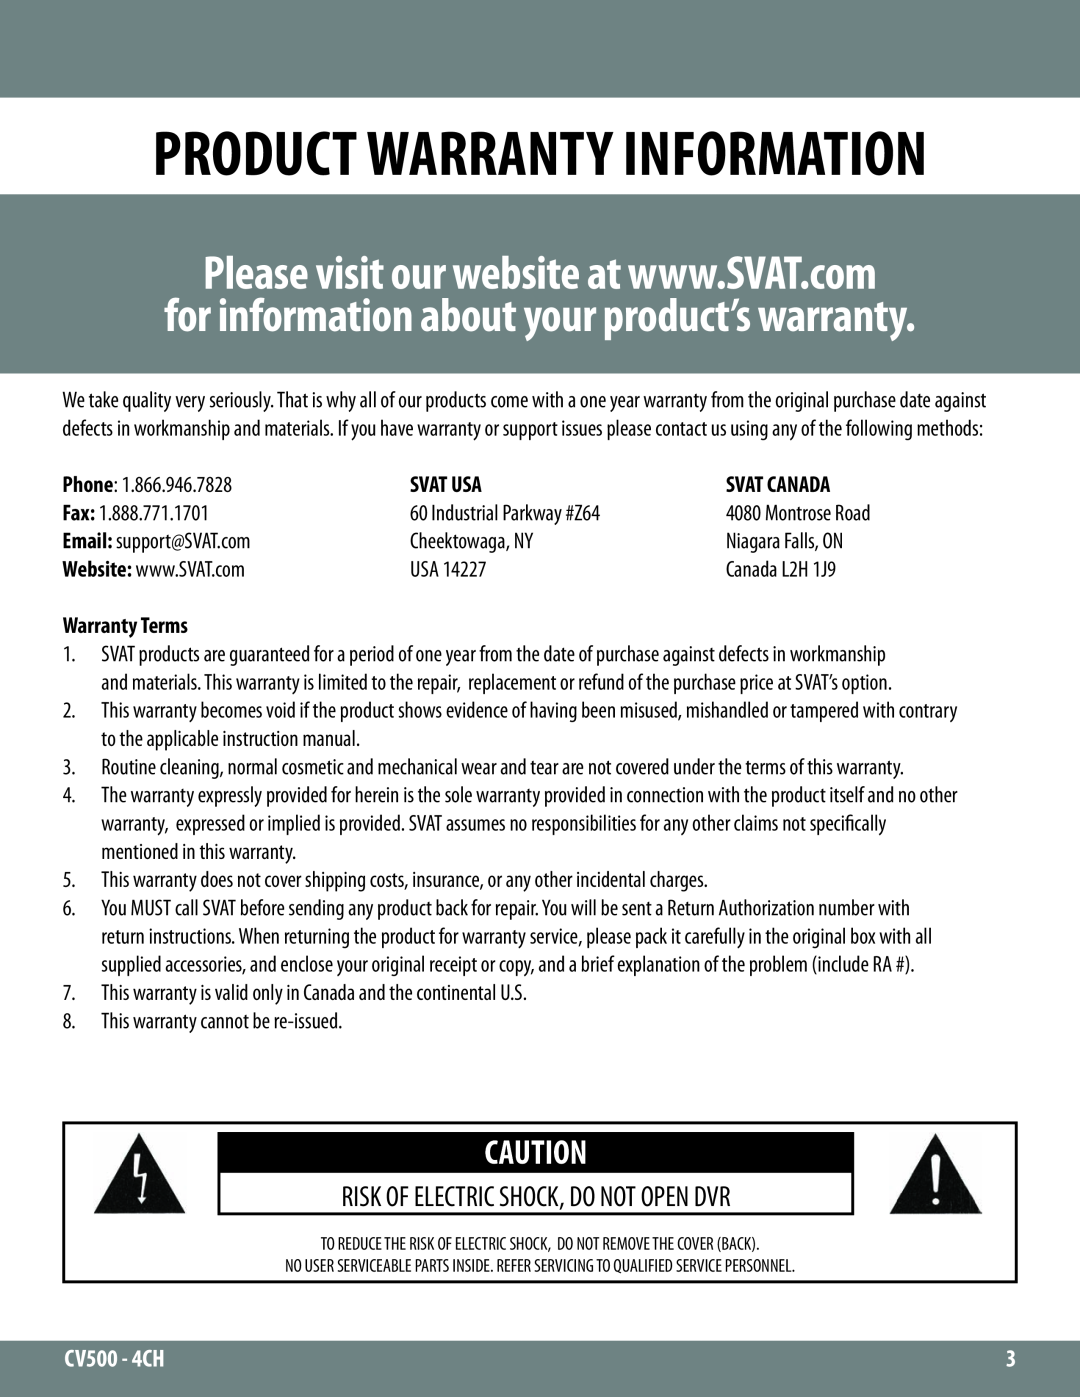 SVAT Electronics 2CV500 - 4CH Product Warranty Information, for information about your product’s warranty 